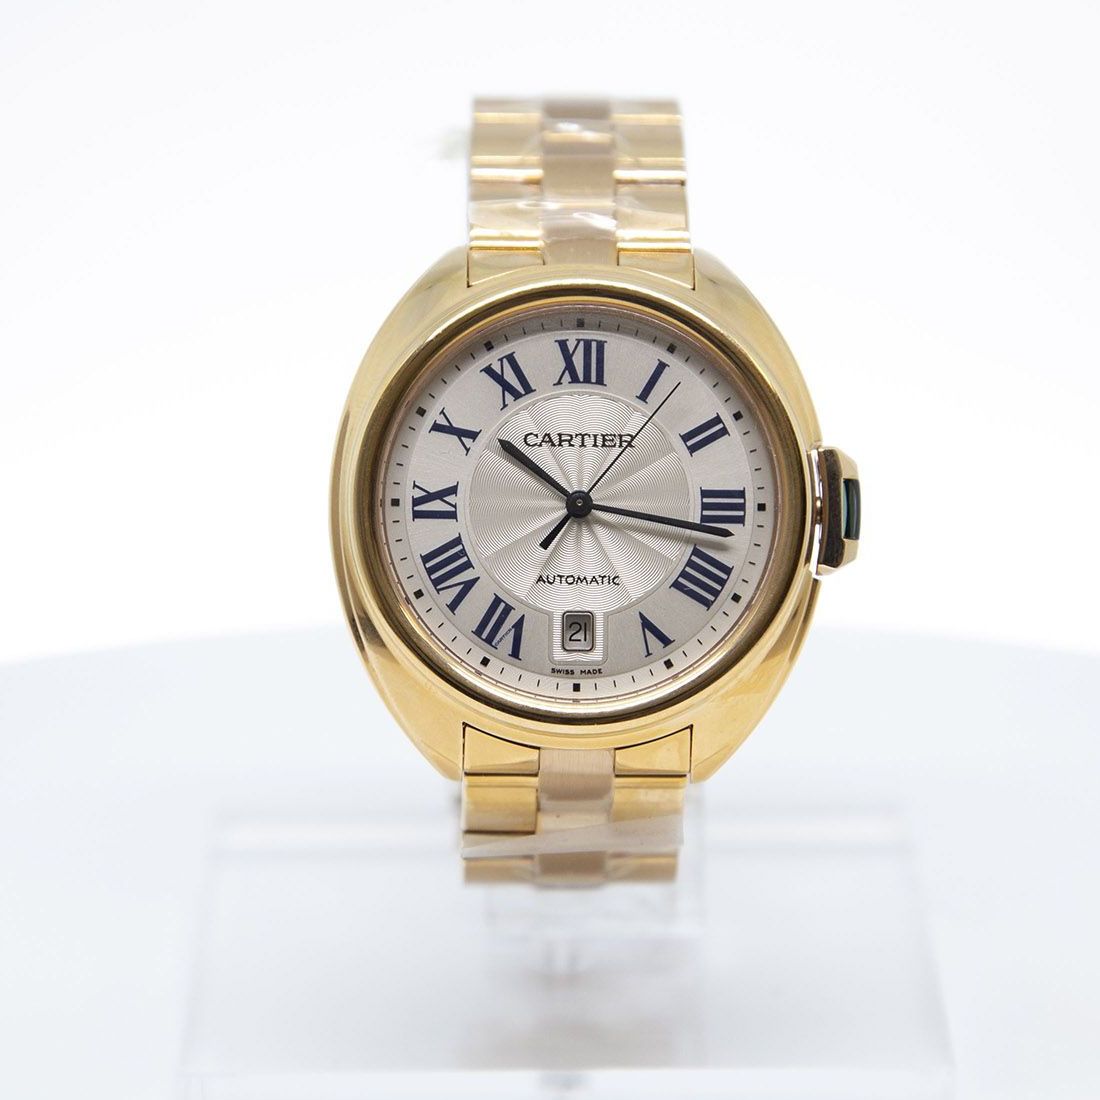 where is the best place to buy a cartier watch